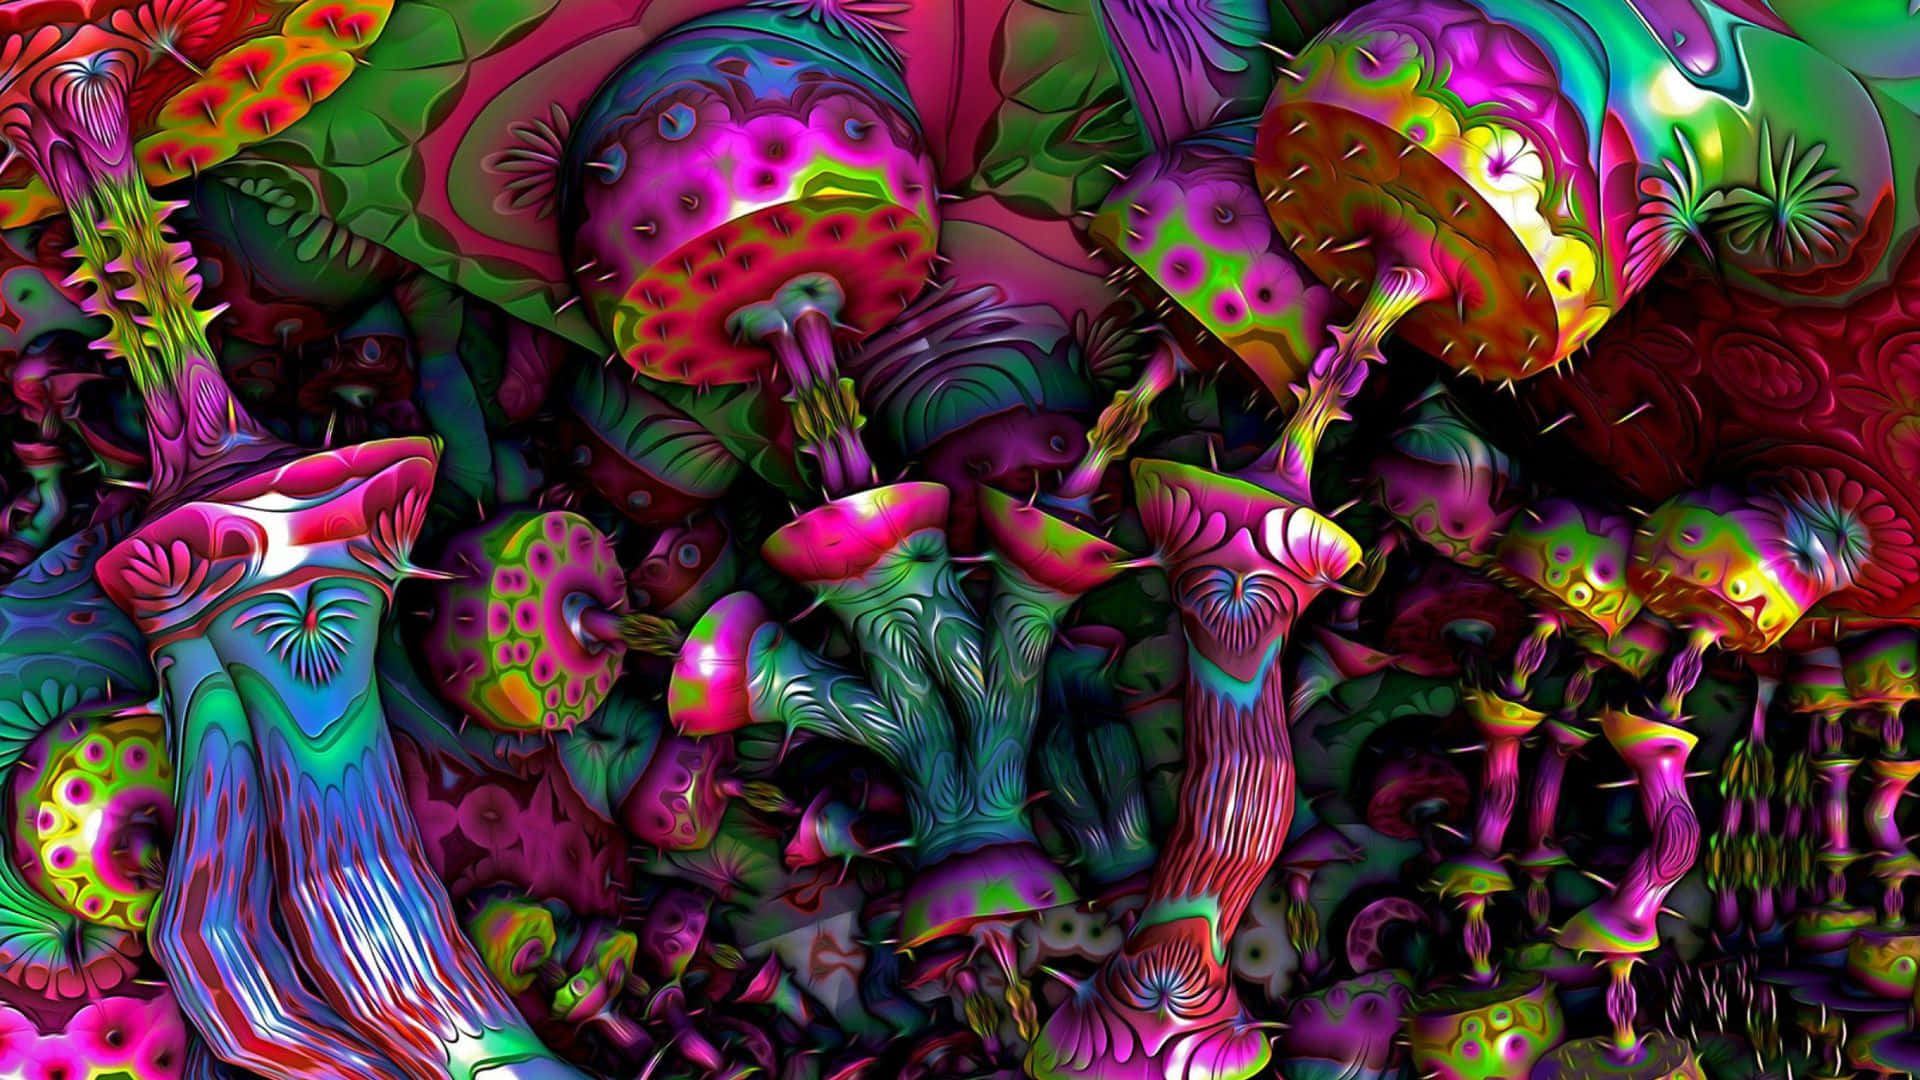 500 Psychedelic Pictures HD  Download Free Images on Unsplash